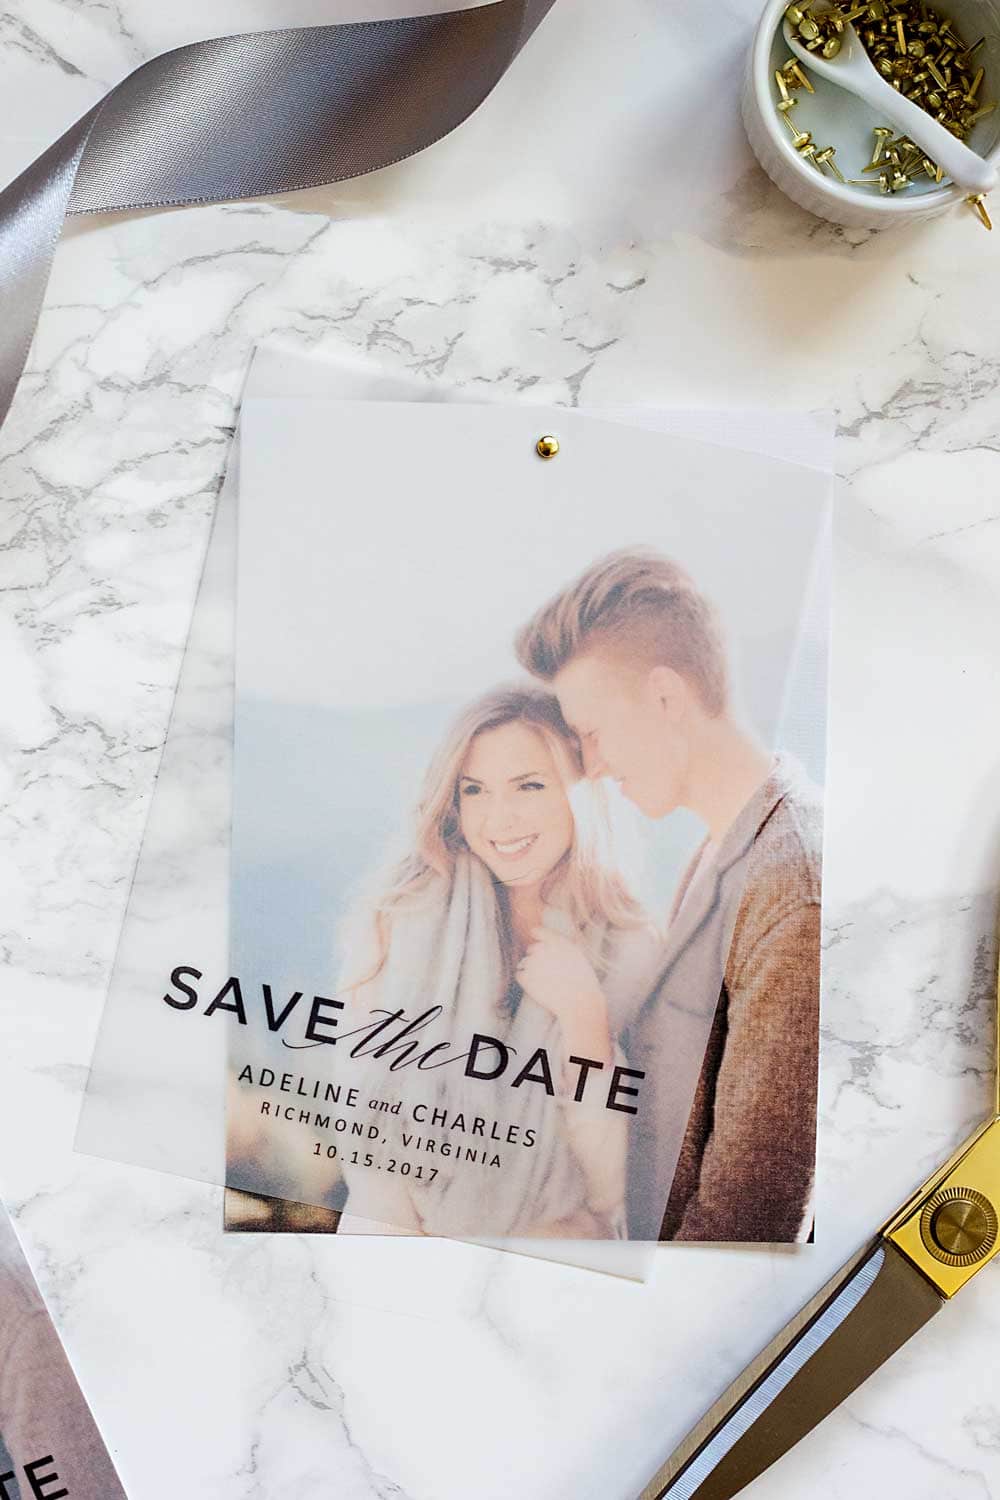 Make these gorgeous save the dates at home with this free save the date template!